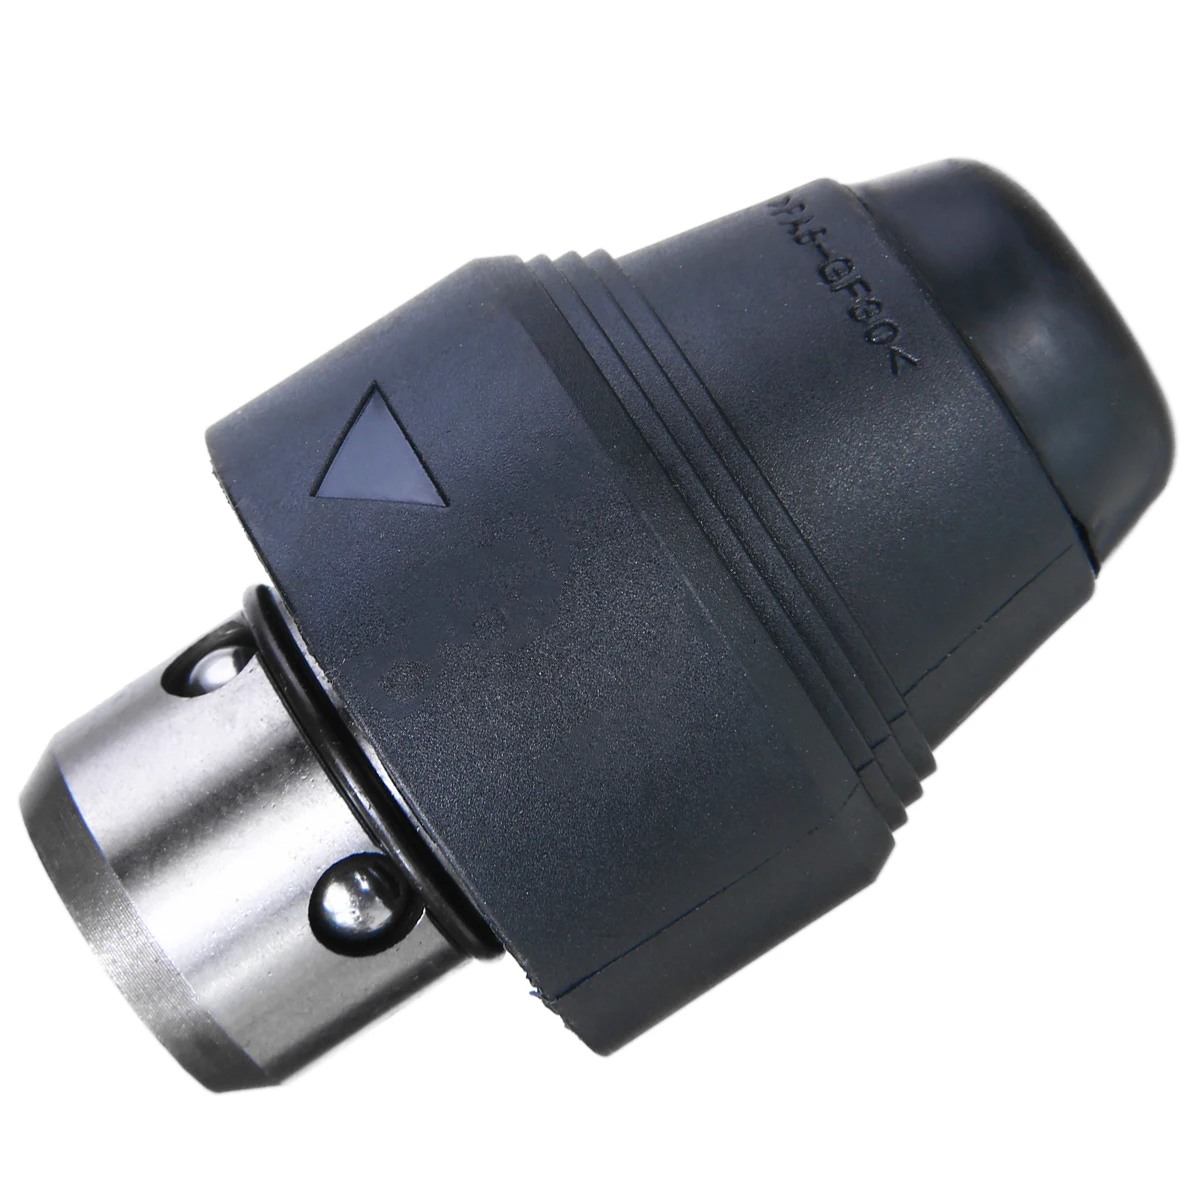 

1Pcs SDS Plus Electric Hammer Drill Chuck Durable Holding Fixture For Bosch GBH 2-26 DFR GBH 4-32 DFR Rotary Tools